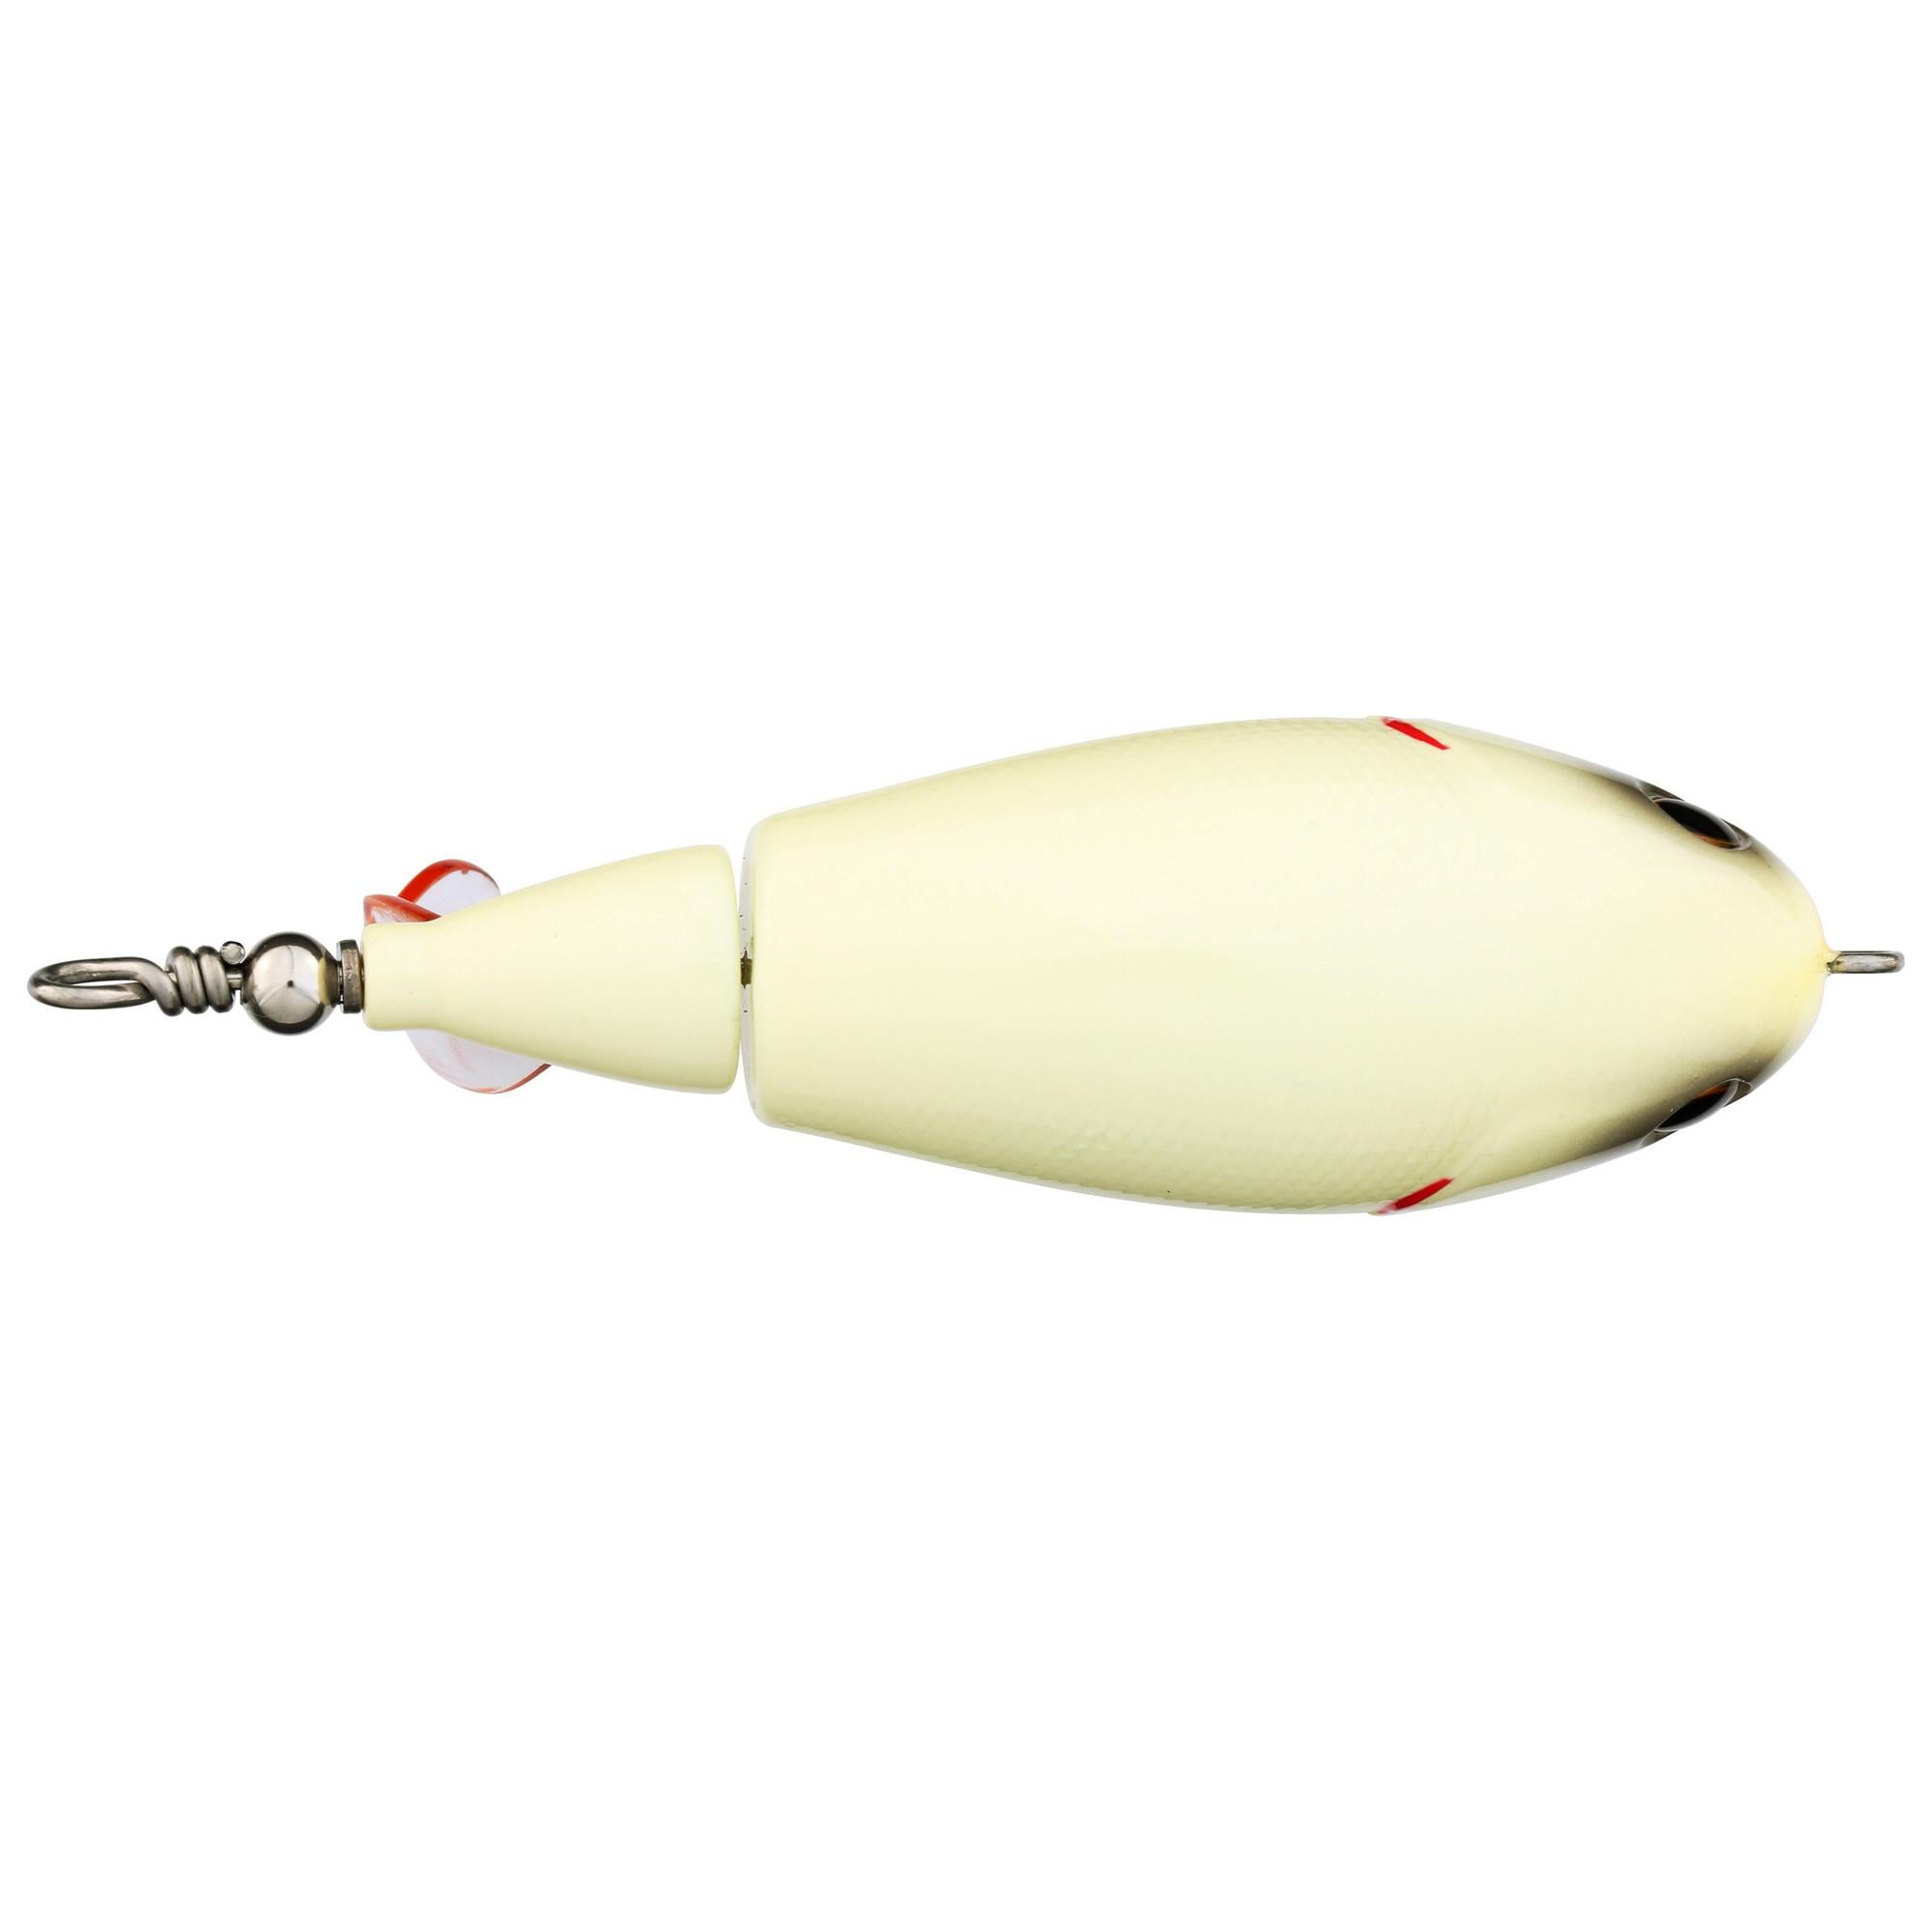  Berkley Bullet Pop Topwater Fishing Lure, Baby Bass, 1/2 oz,  80mm Topwater, Tail Weighted Design Tuned for Maximum Casting Distance,  Equipped with Fusion19 Hook : Sports & Outdoors